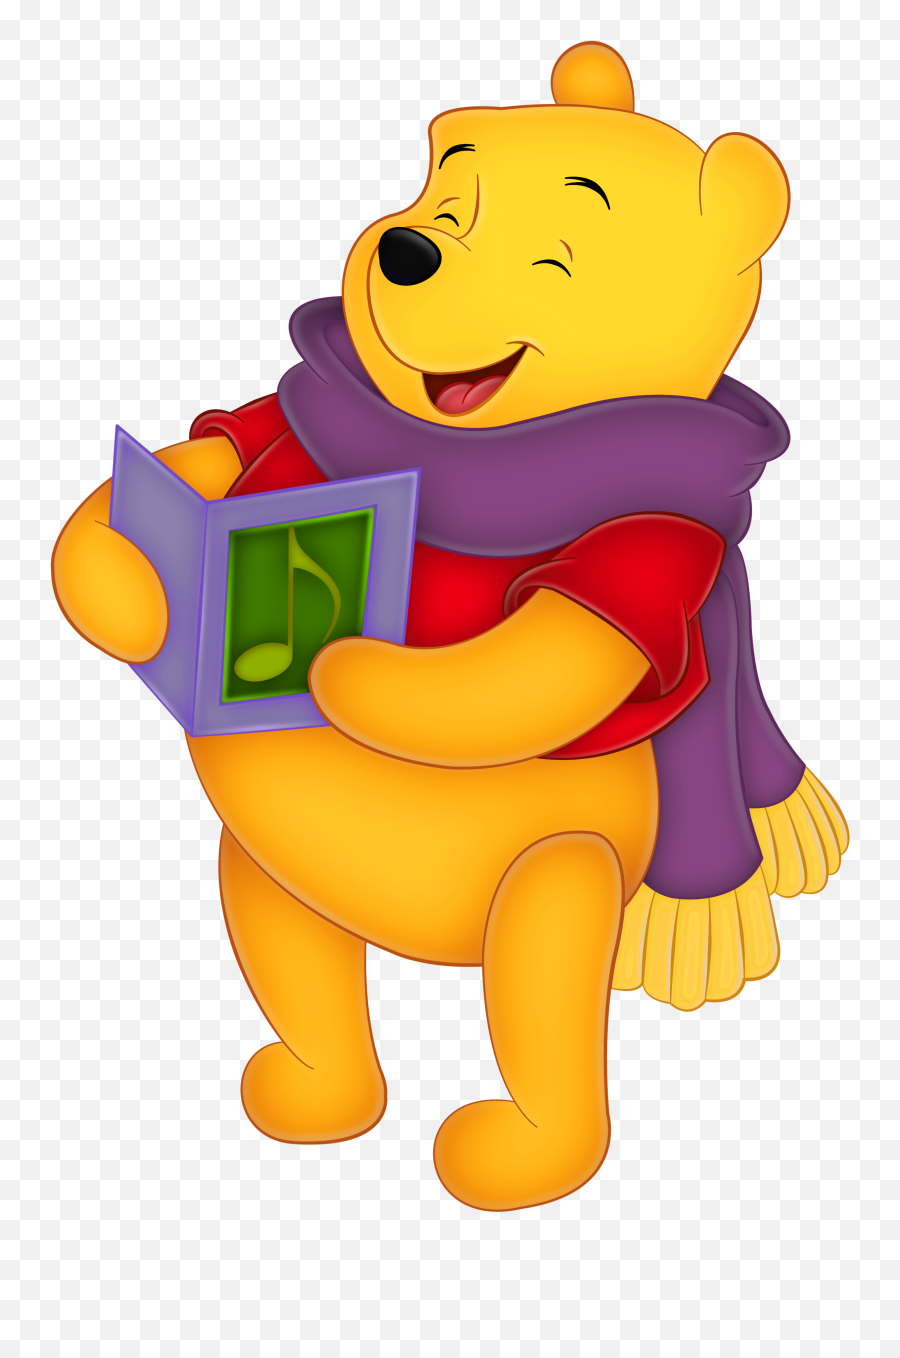 Pooh With A Book In His Hands - Christmas Winnie The Pooh Emoji,Eeyore Emotions